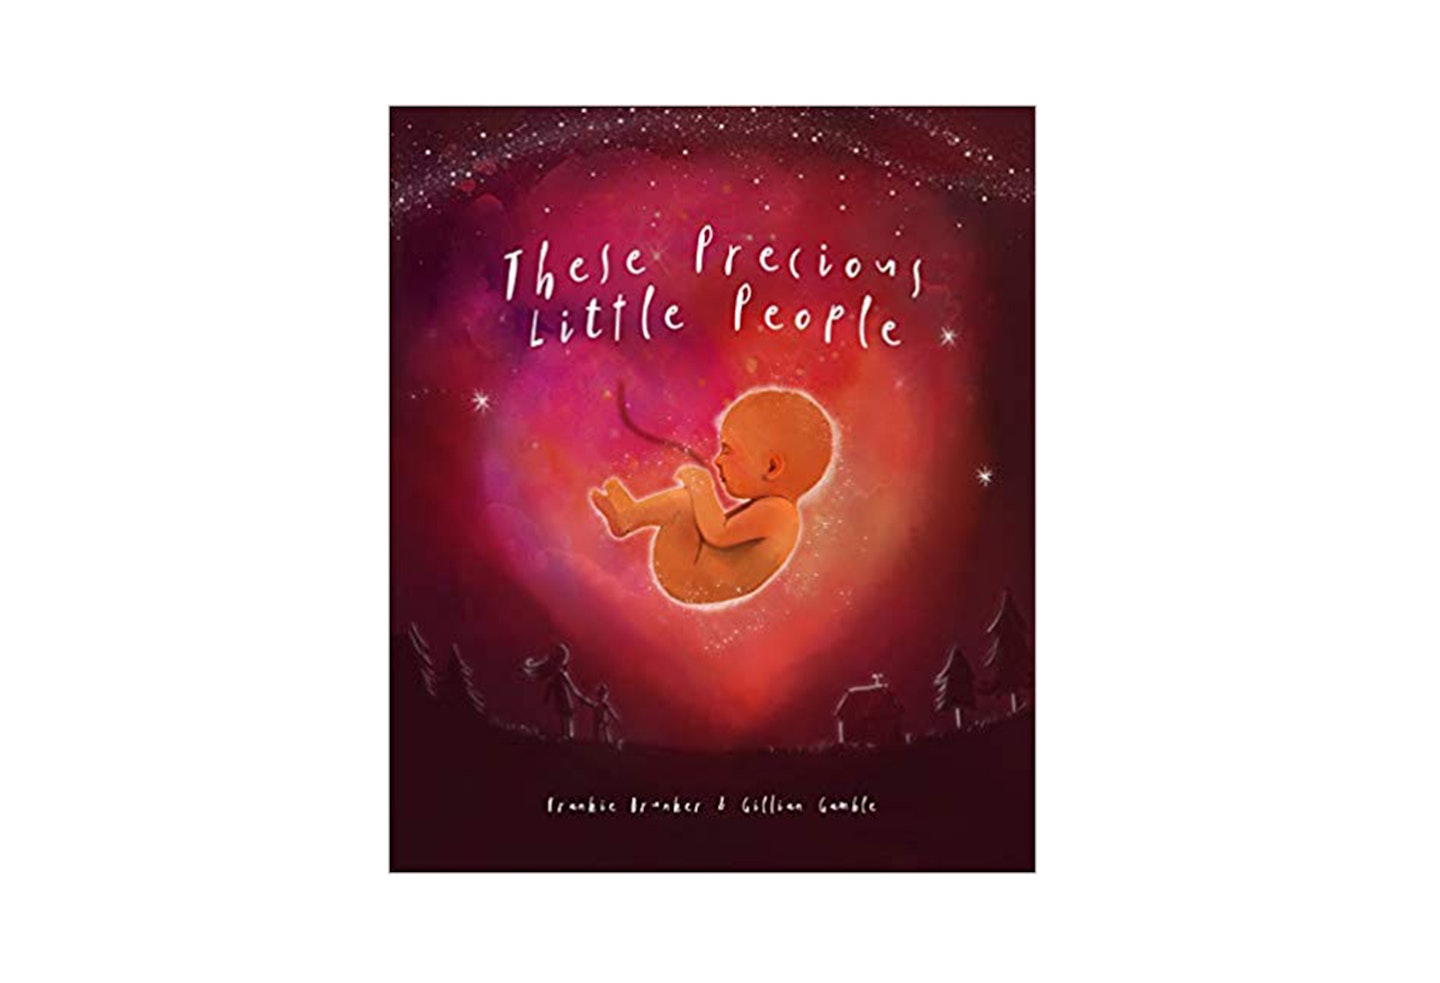 The invaluable book explaining infant death or stillbirth to young siblings